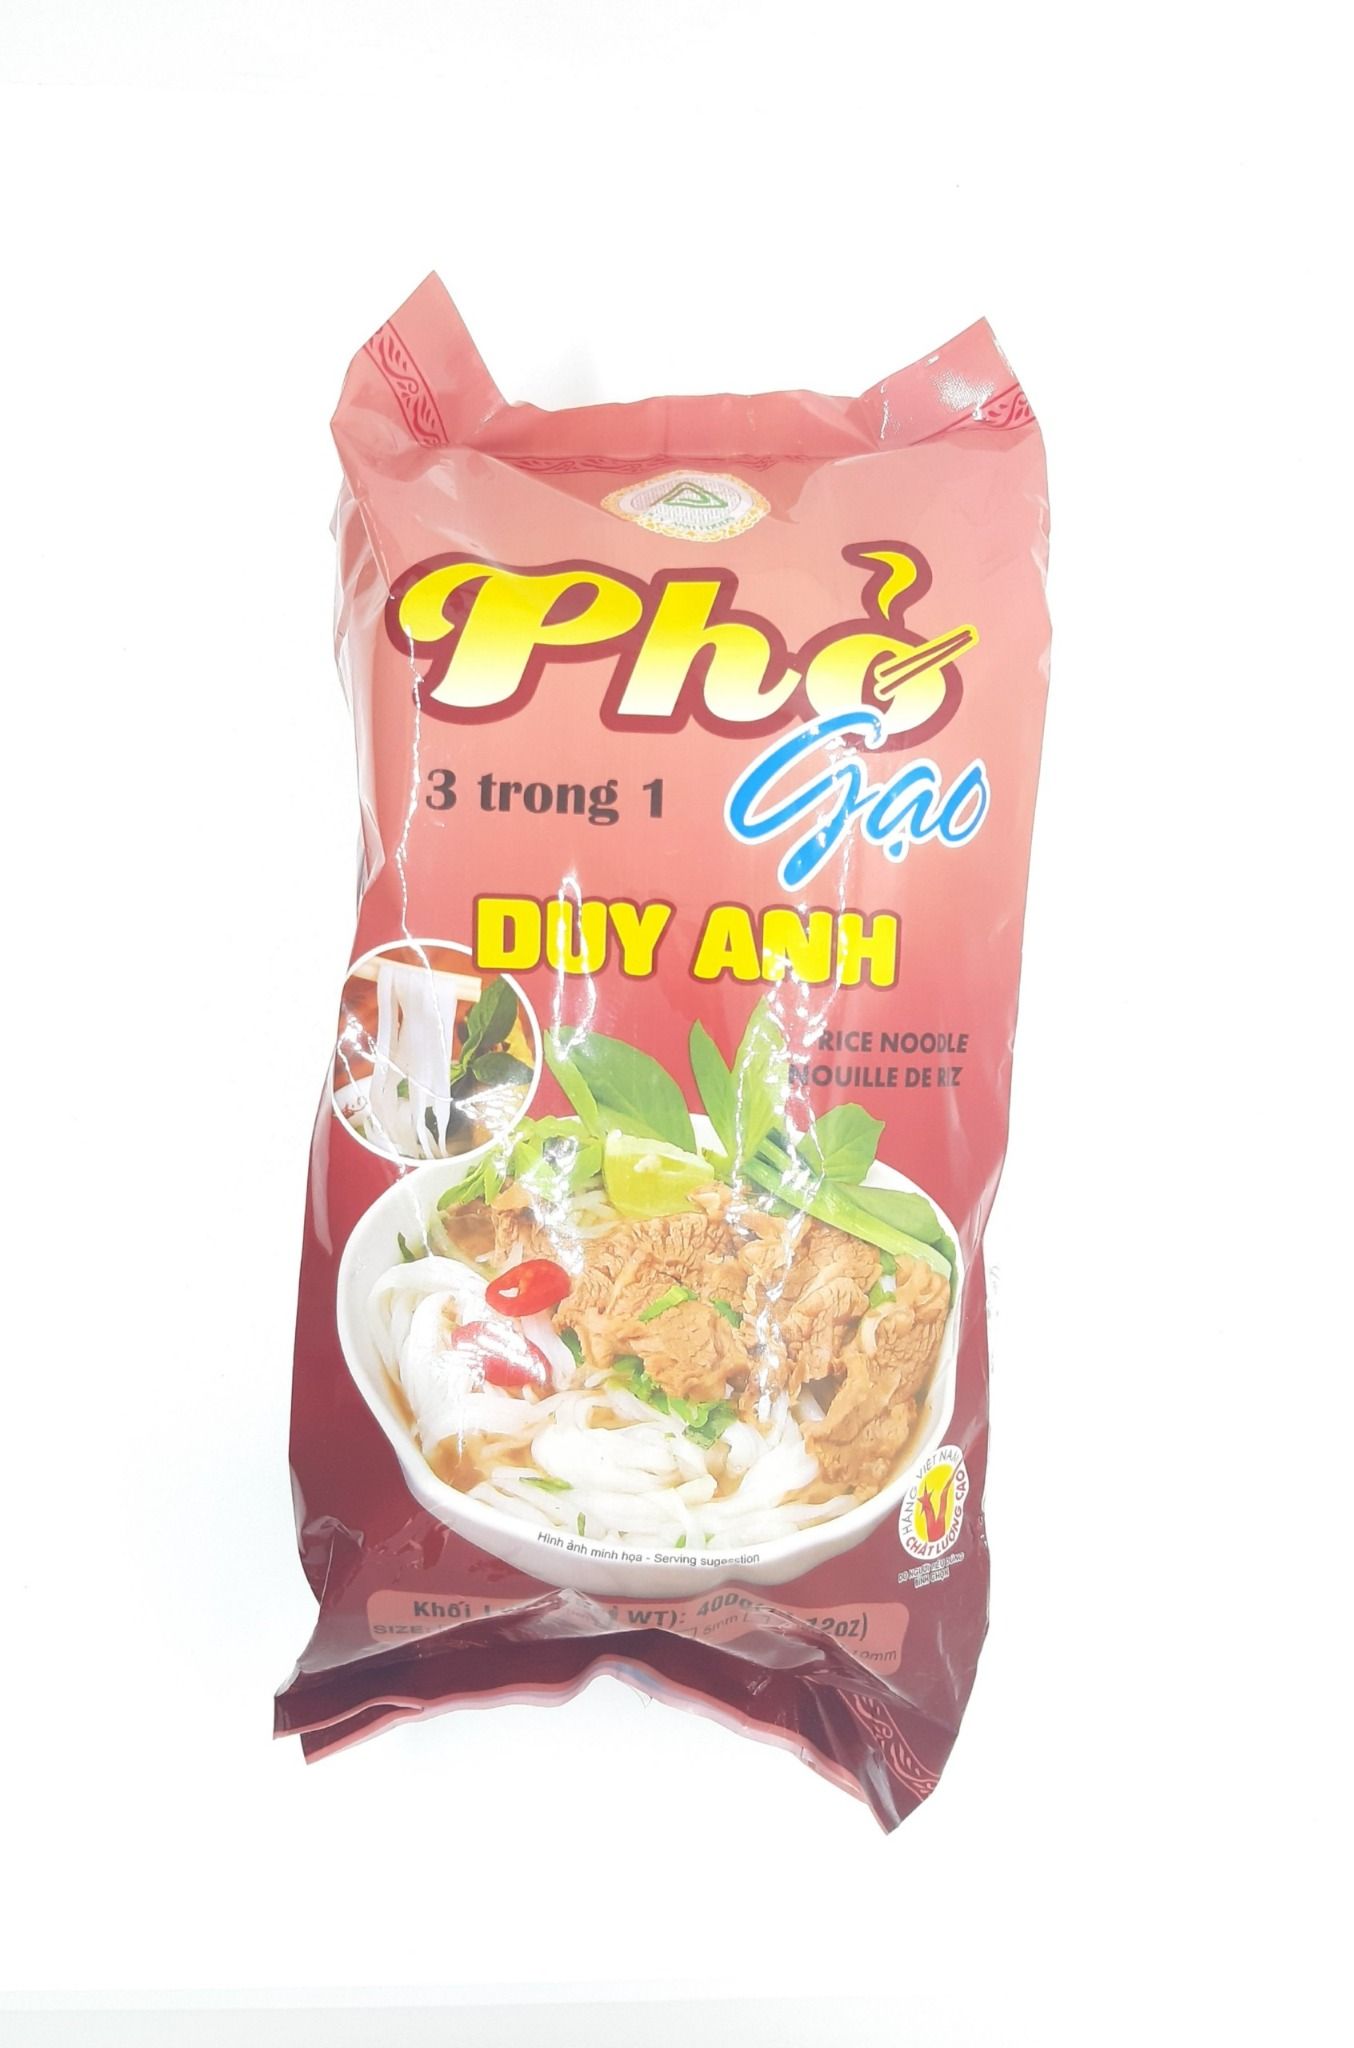  Phở gạo 3 trong 1 Duy Anh 400g 